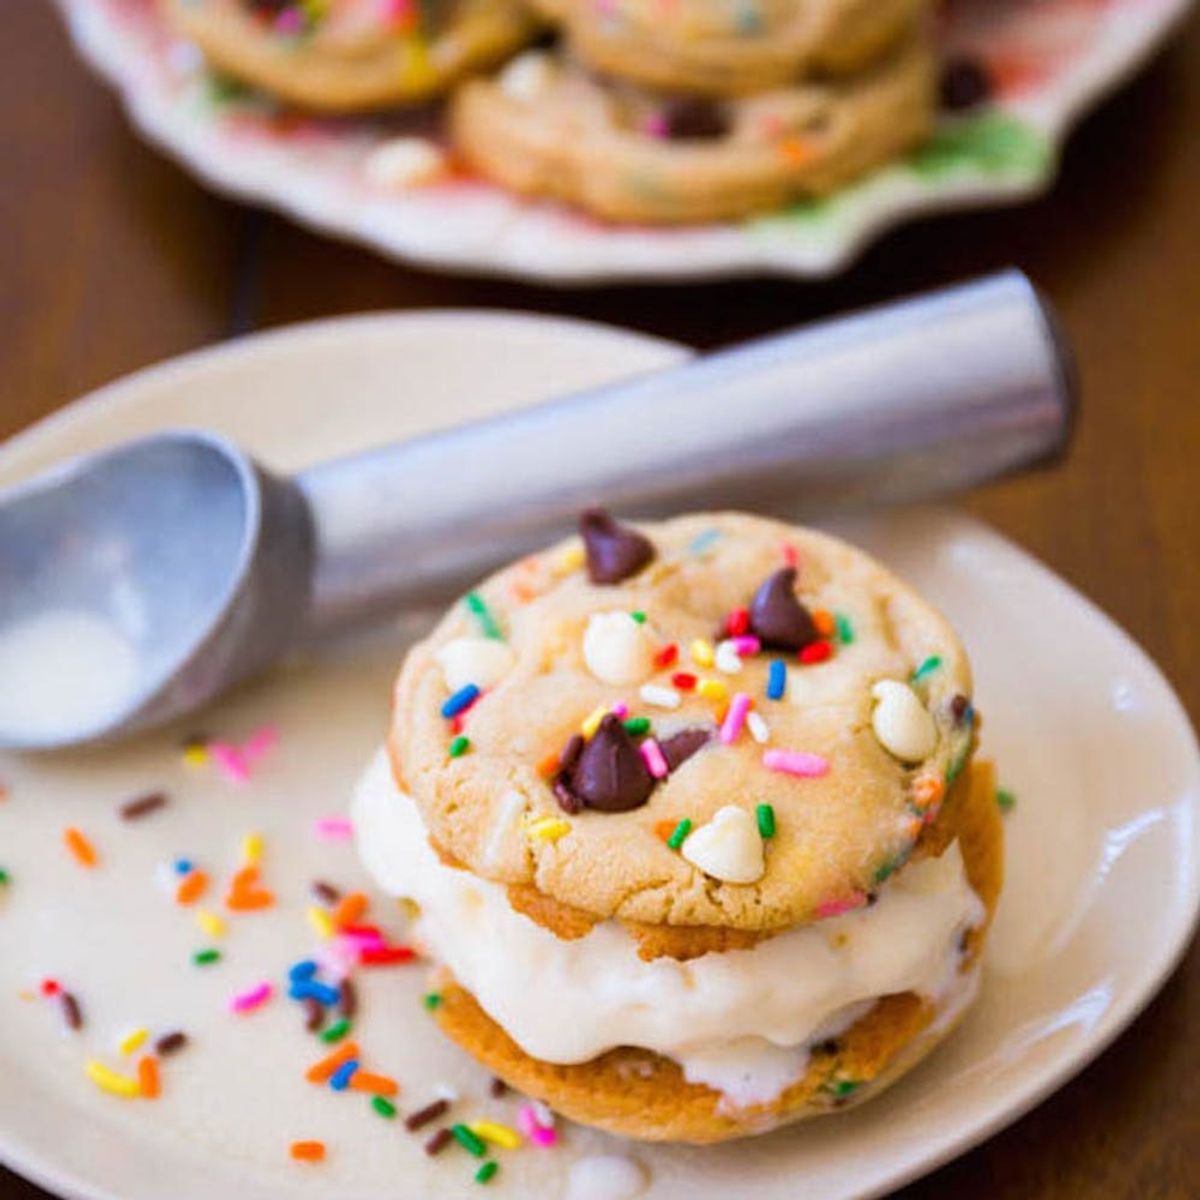 25 Ways to Turn Ordinary Cookies into Out-of-This World Ice Cream Sandwiches